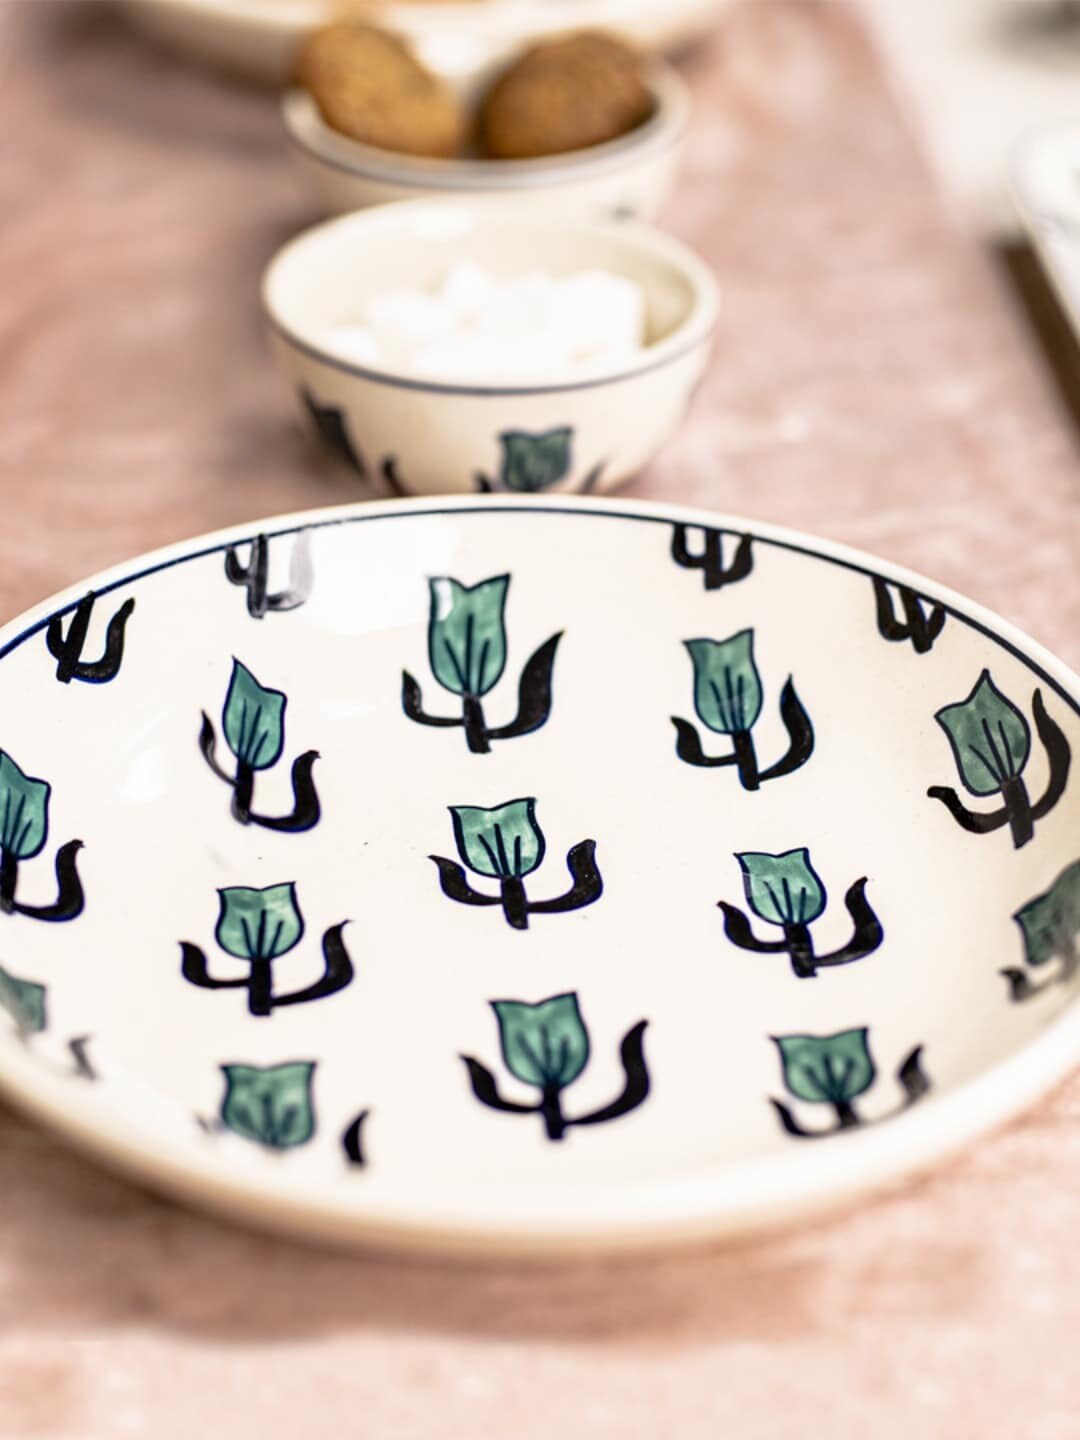 The 7 DeKor Green Printed Serving Dish Price in India